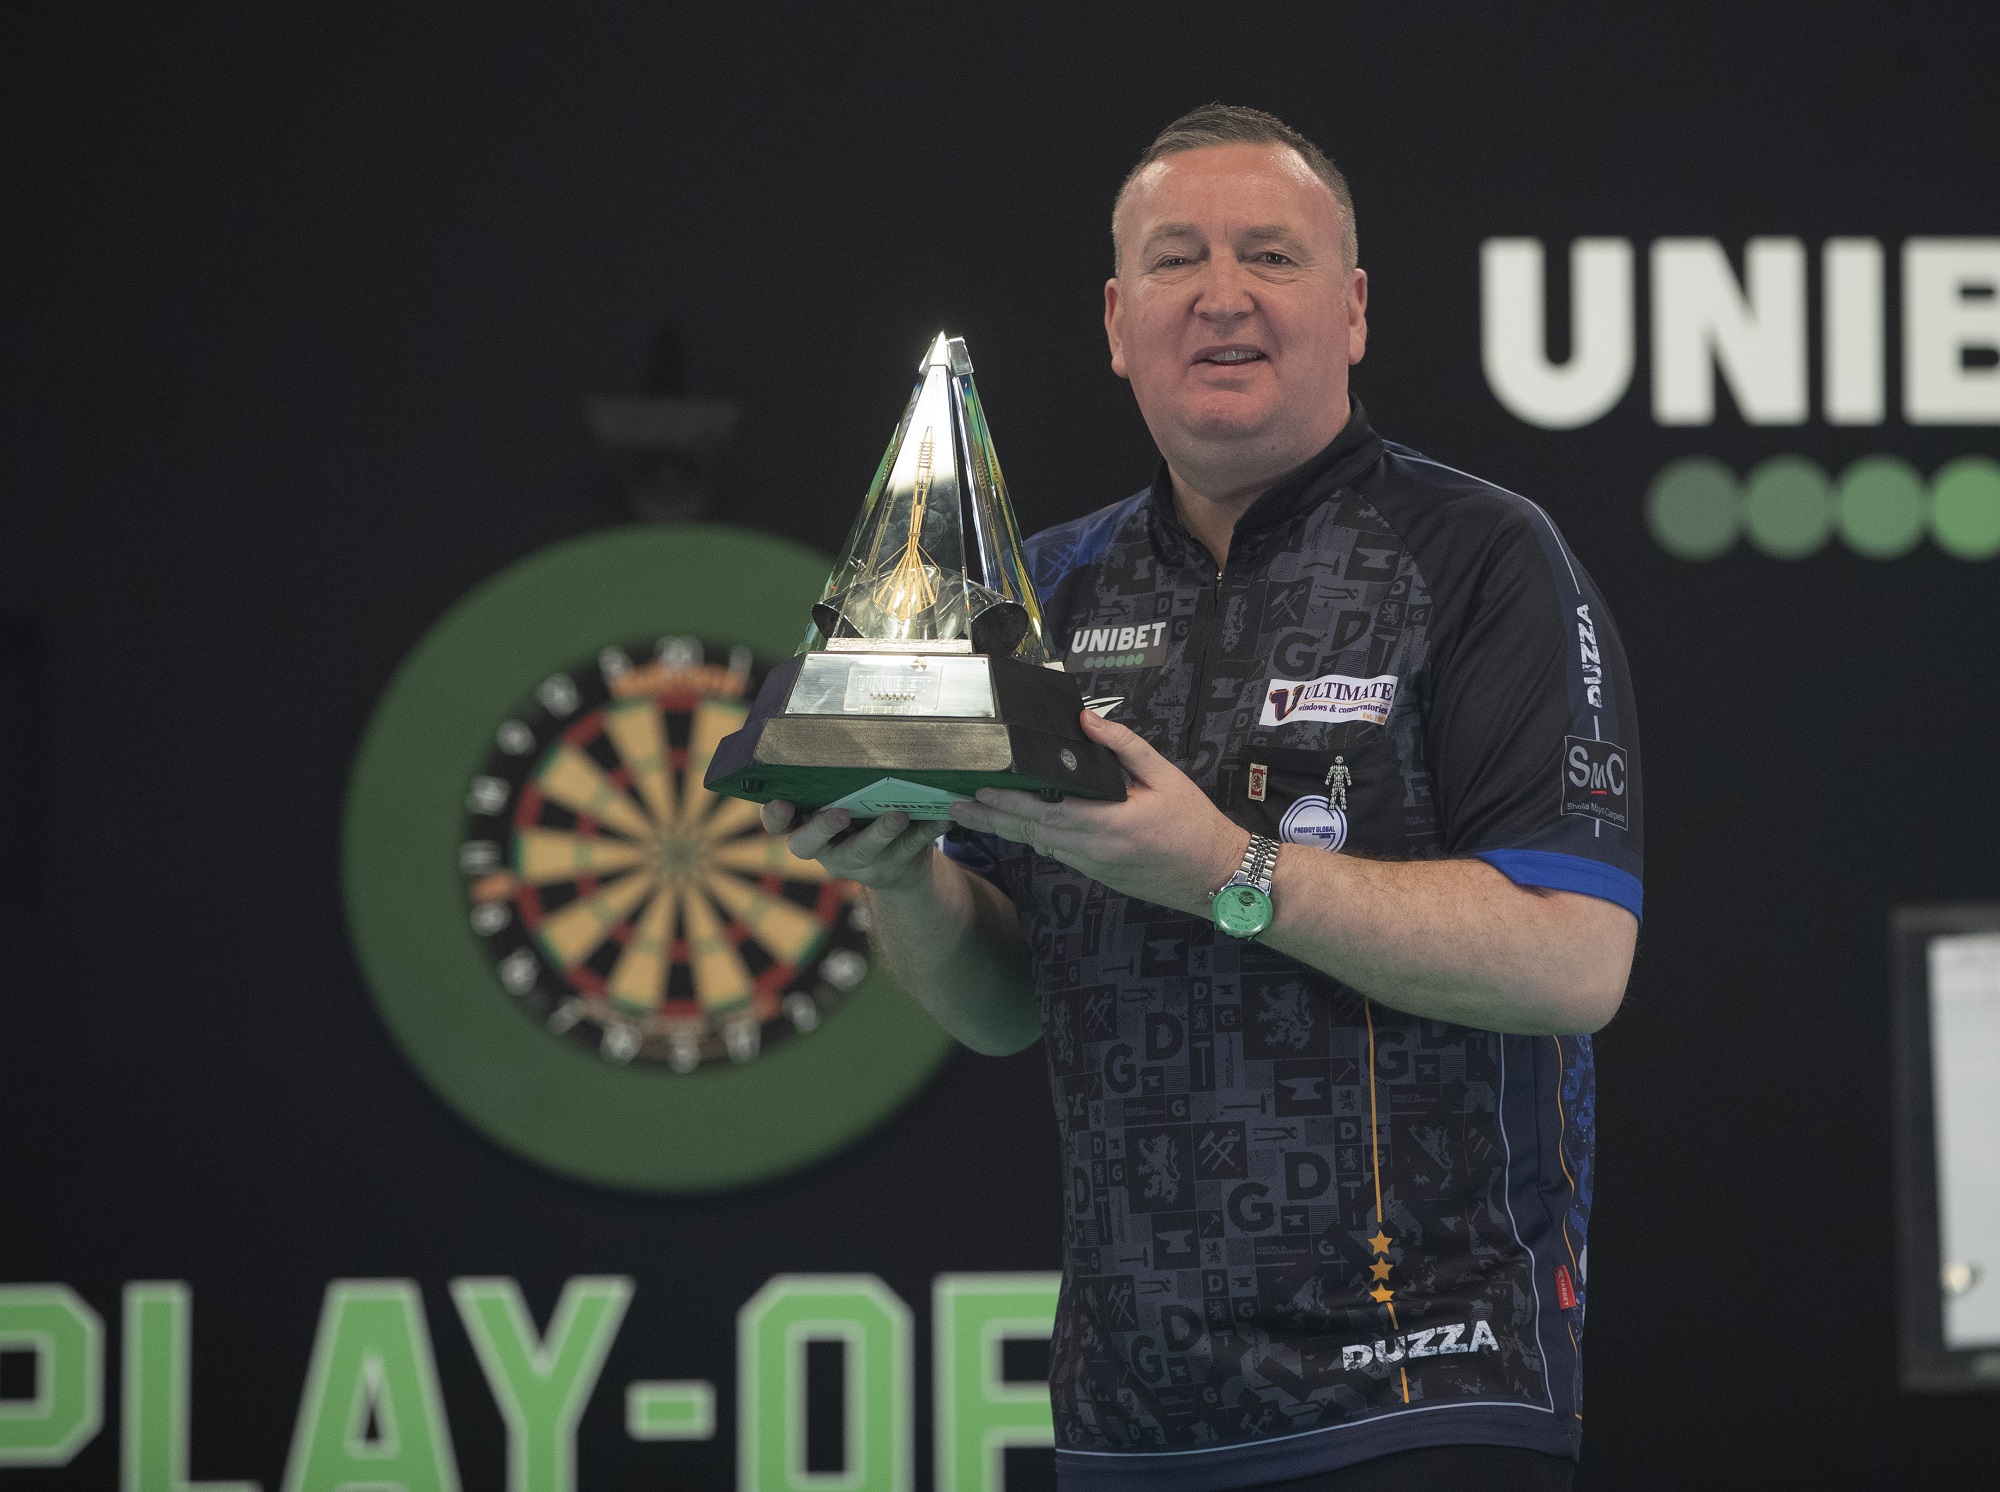 Glen Durrant “Since August something has crept into my game and it’s affected my confidence.”